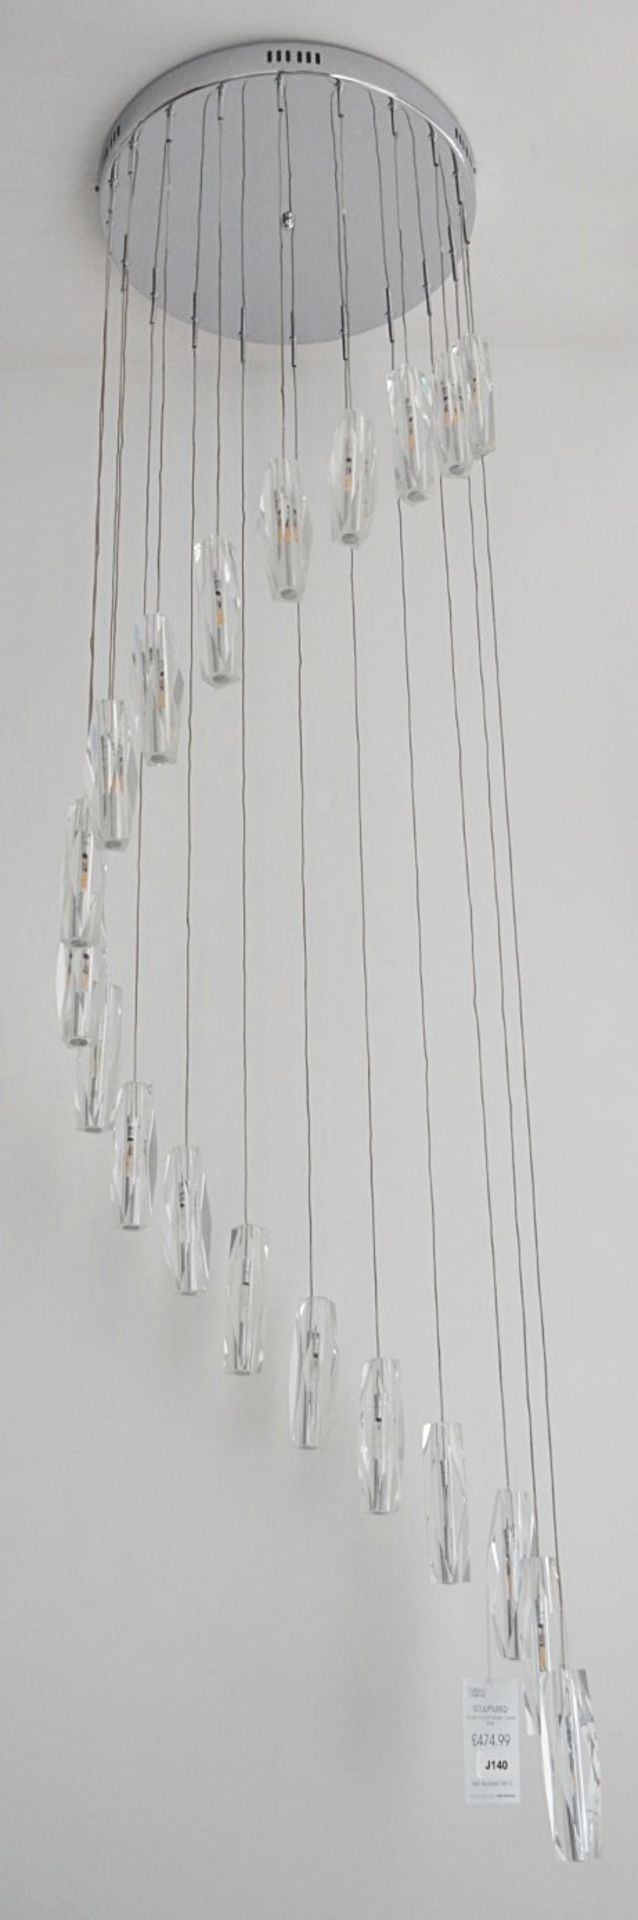 1 x Sculptured Ice Chrome 20 Light Dingle Dangle Pendant With Crystal Glass - RRP £792.00 - Image 2 of 6